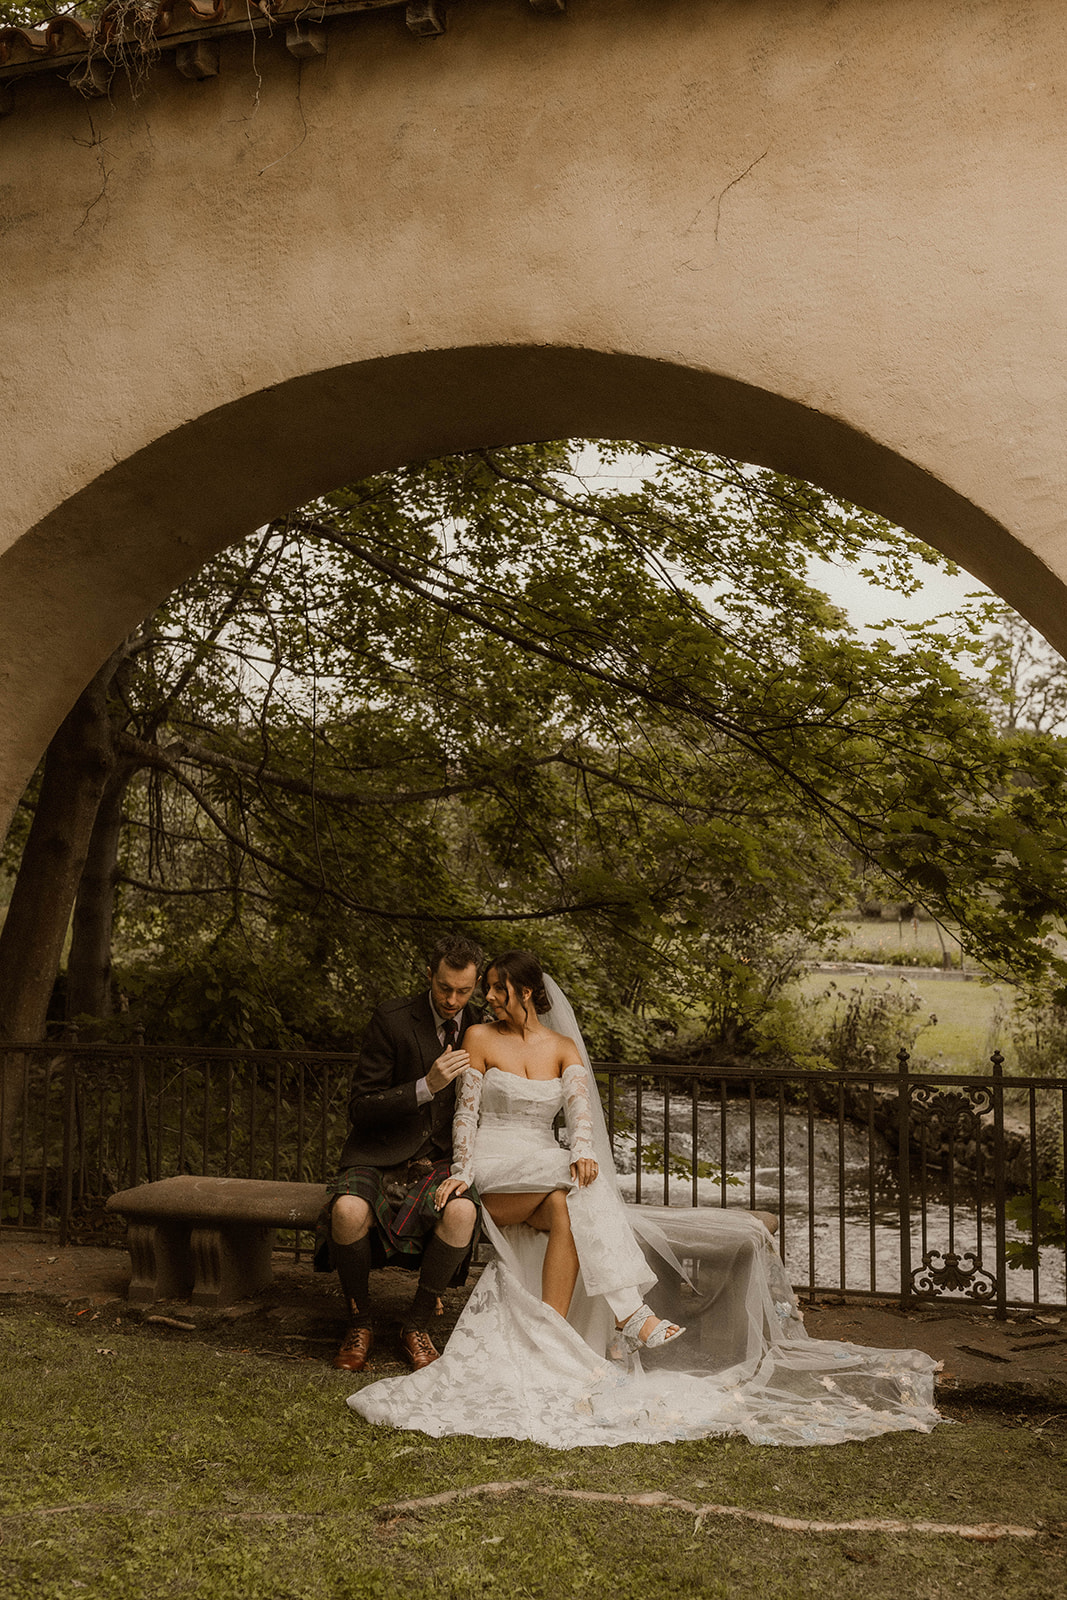 Elena and Ben share a tender moment against the backdrop of Melody Manor Resort's scenic vistas.